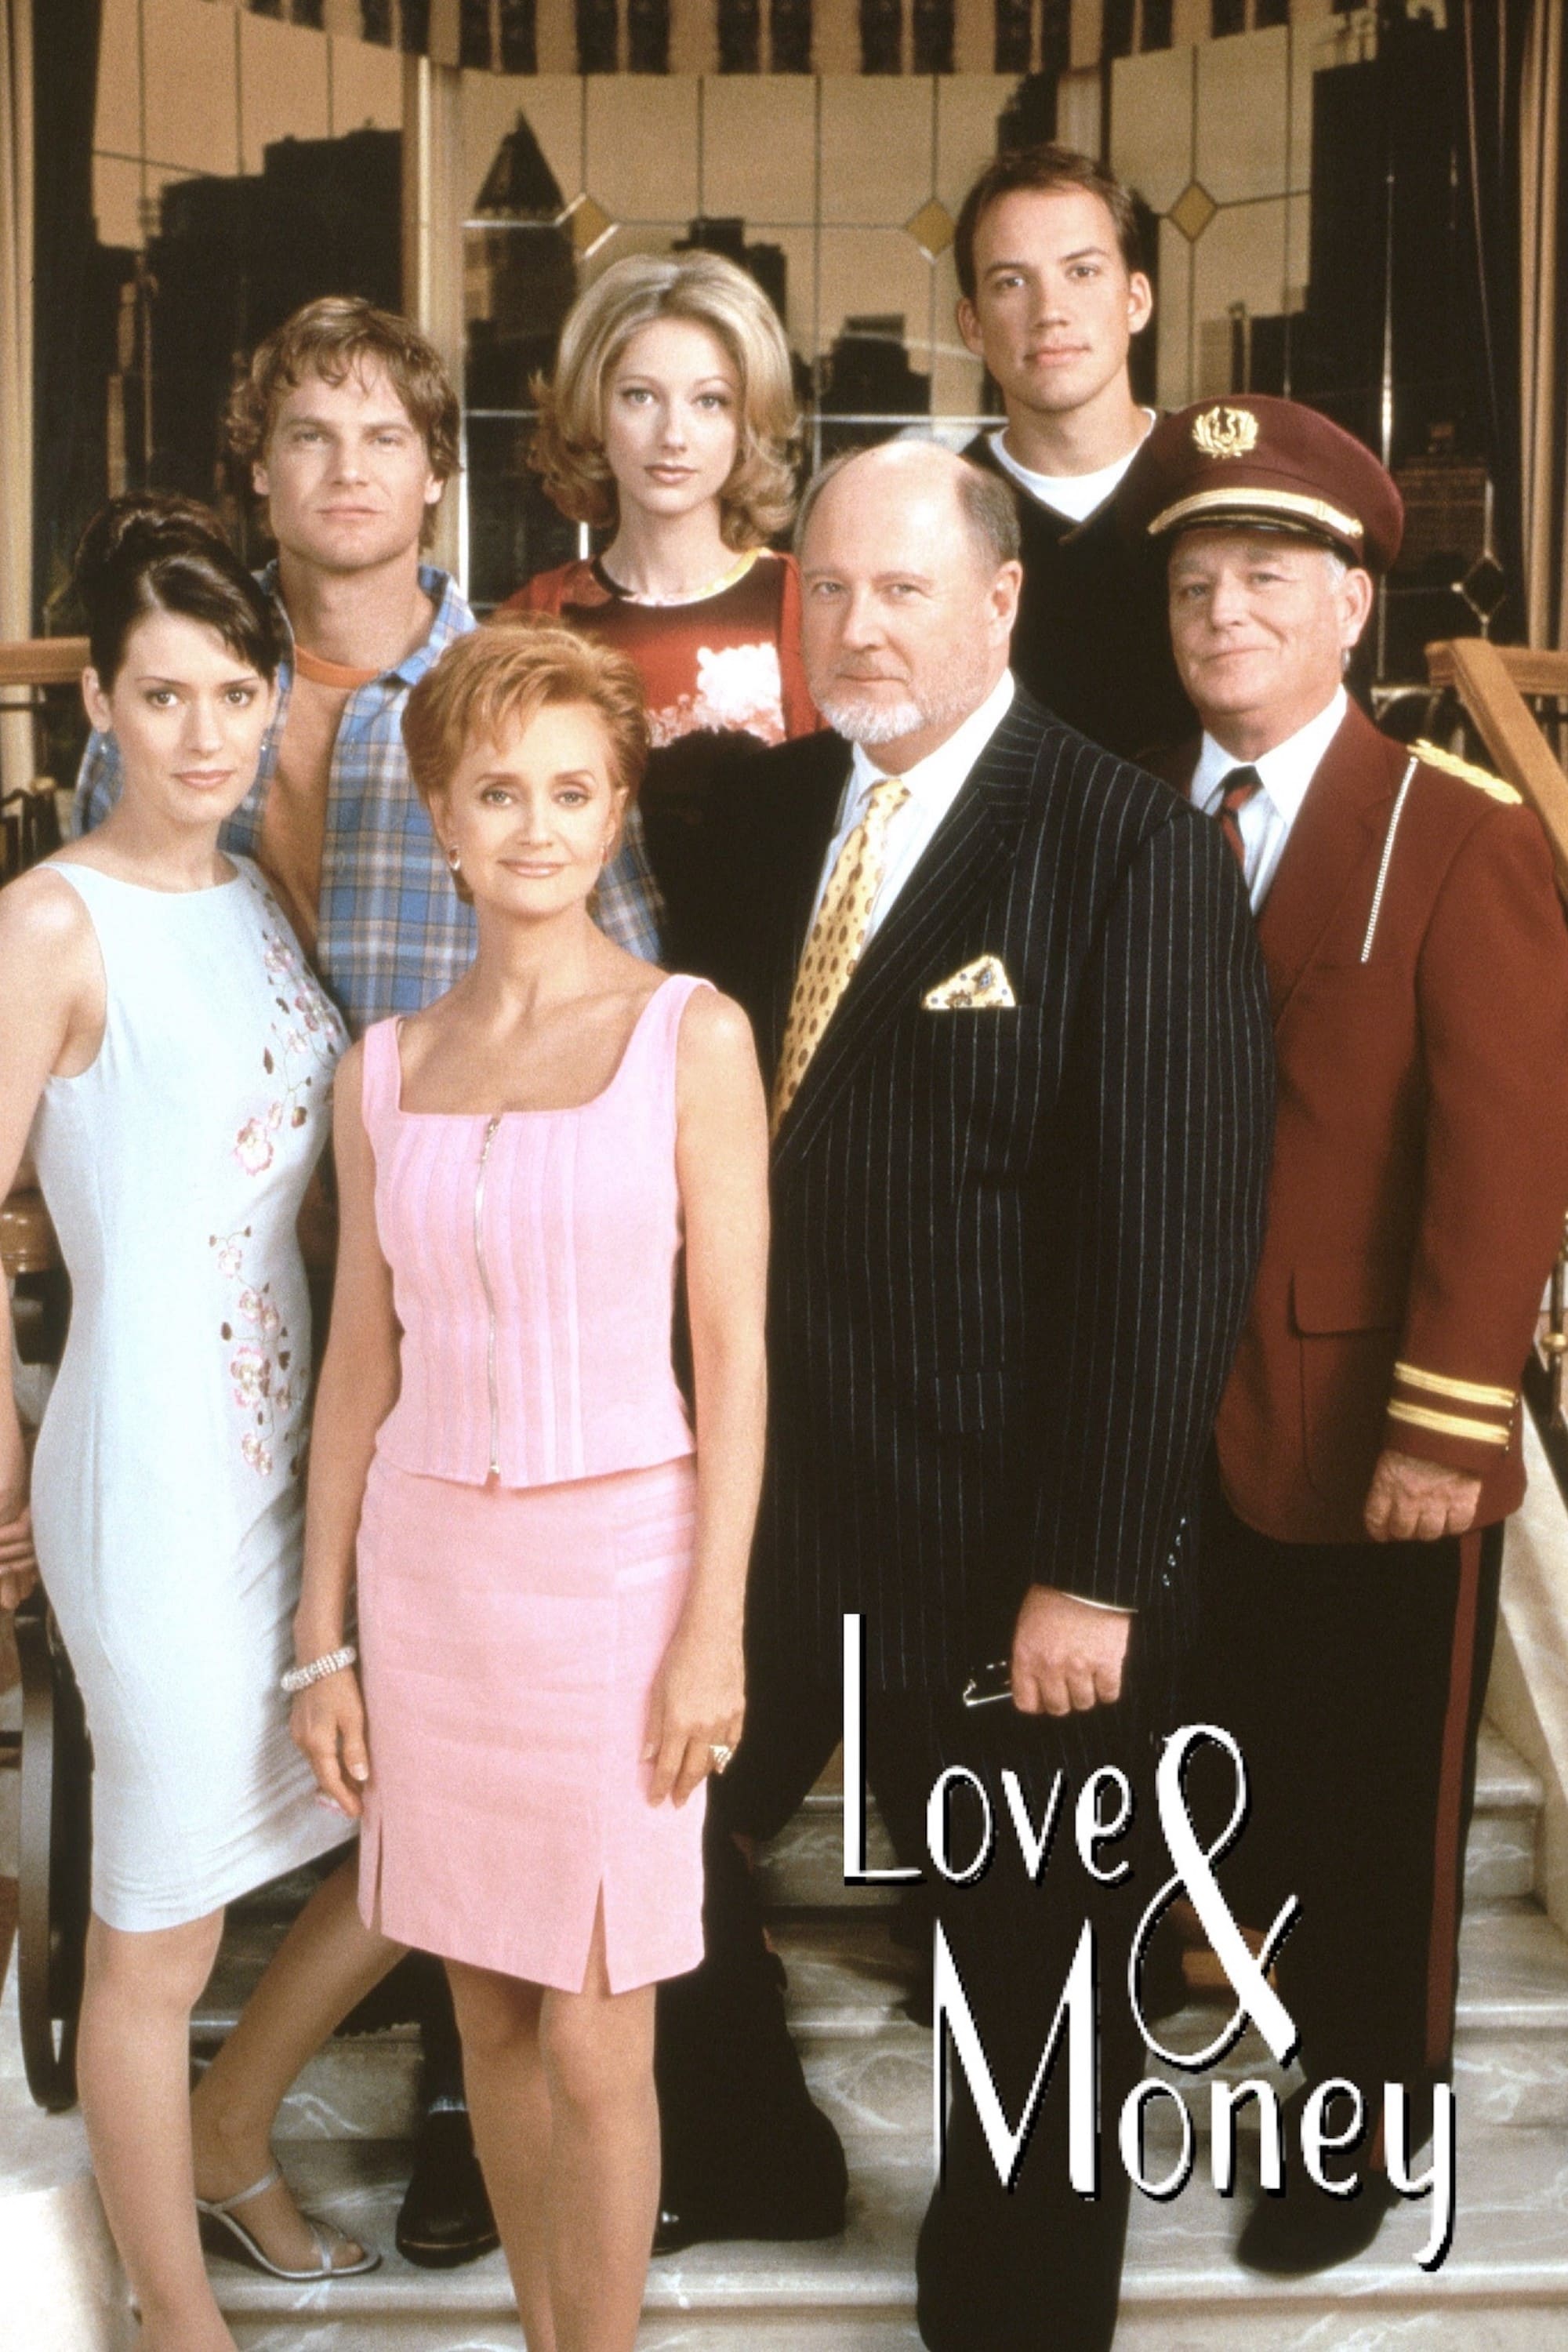 Love & Money TV Shows About Class Differences